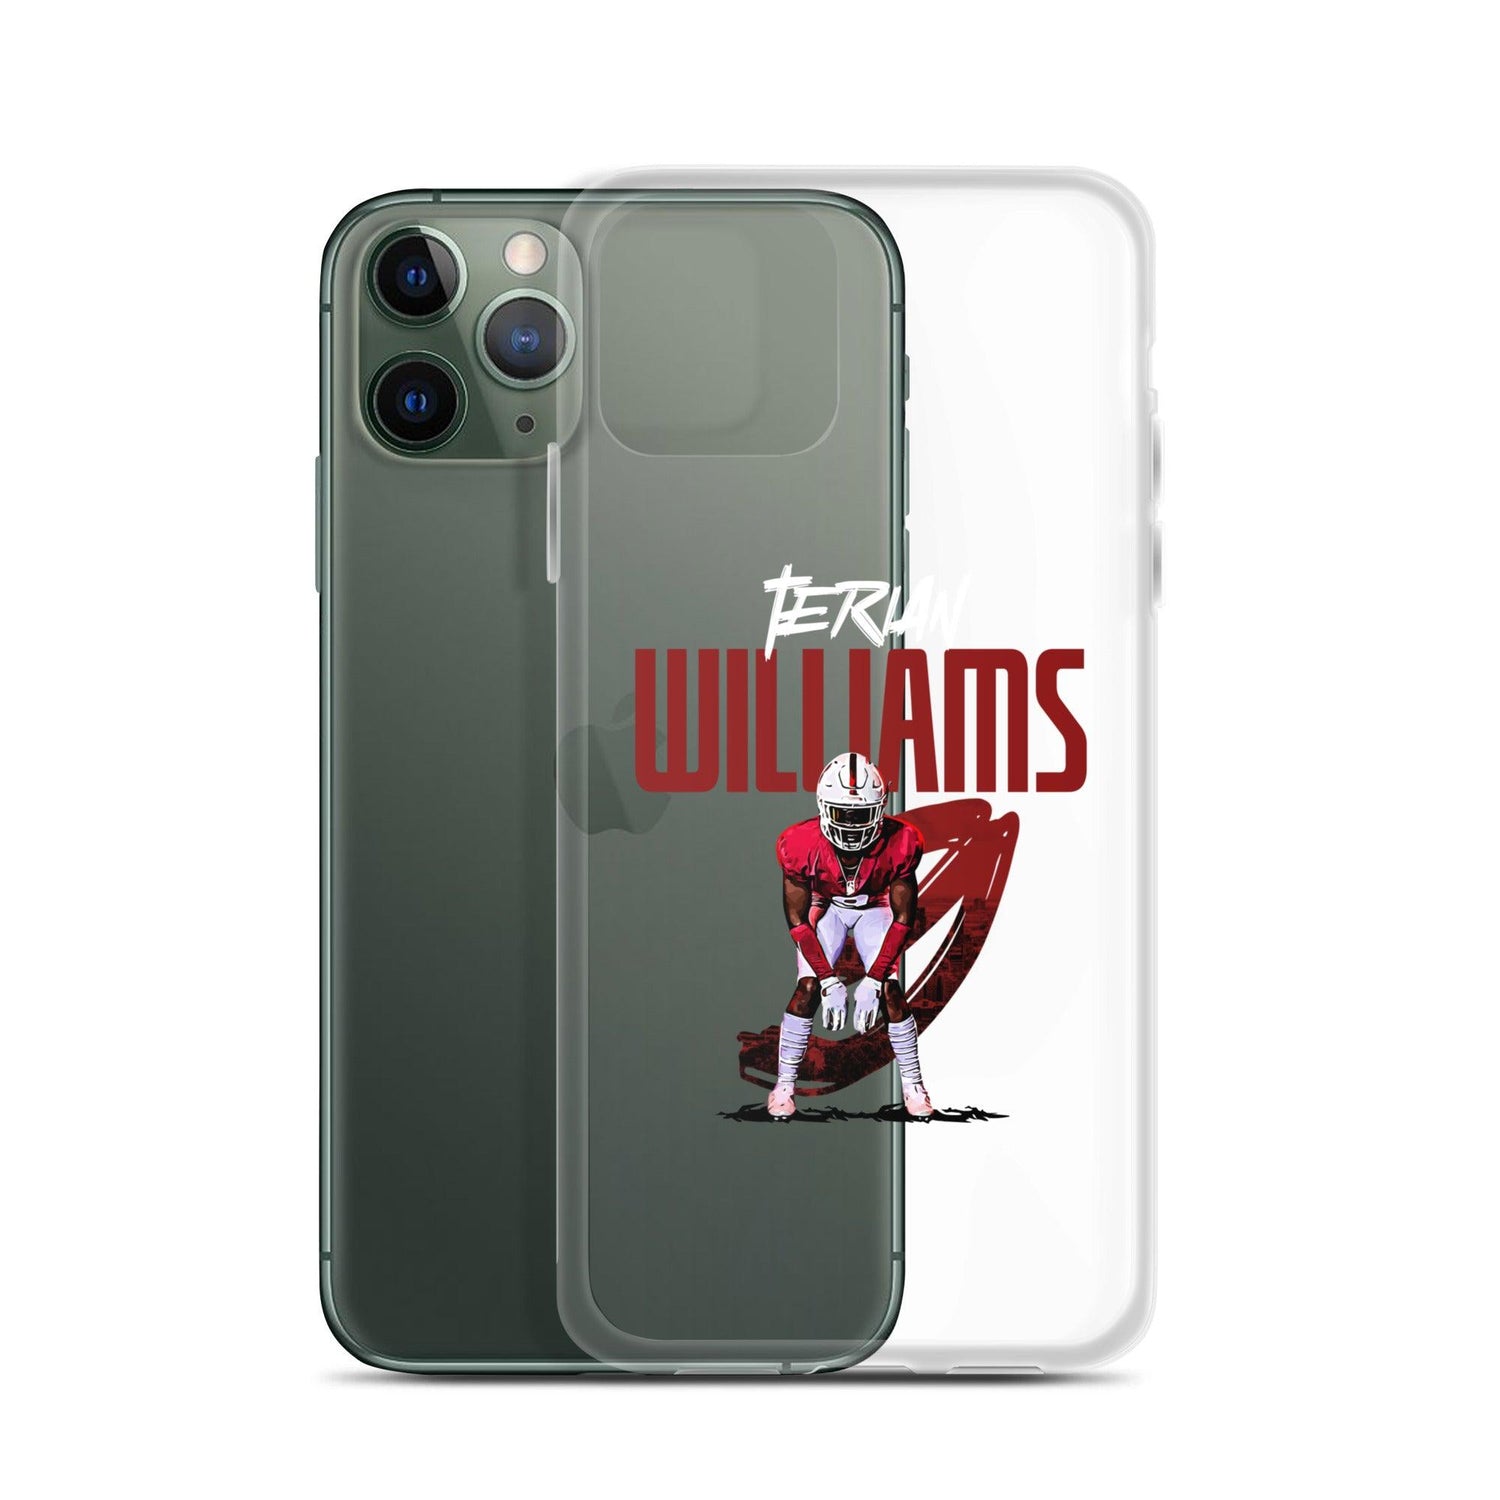 Terian Williams "Gameday" iPhone Case - Fan Arch